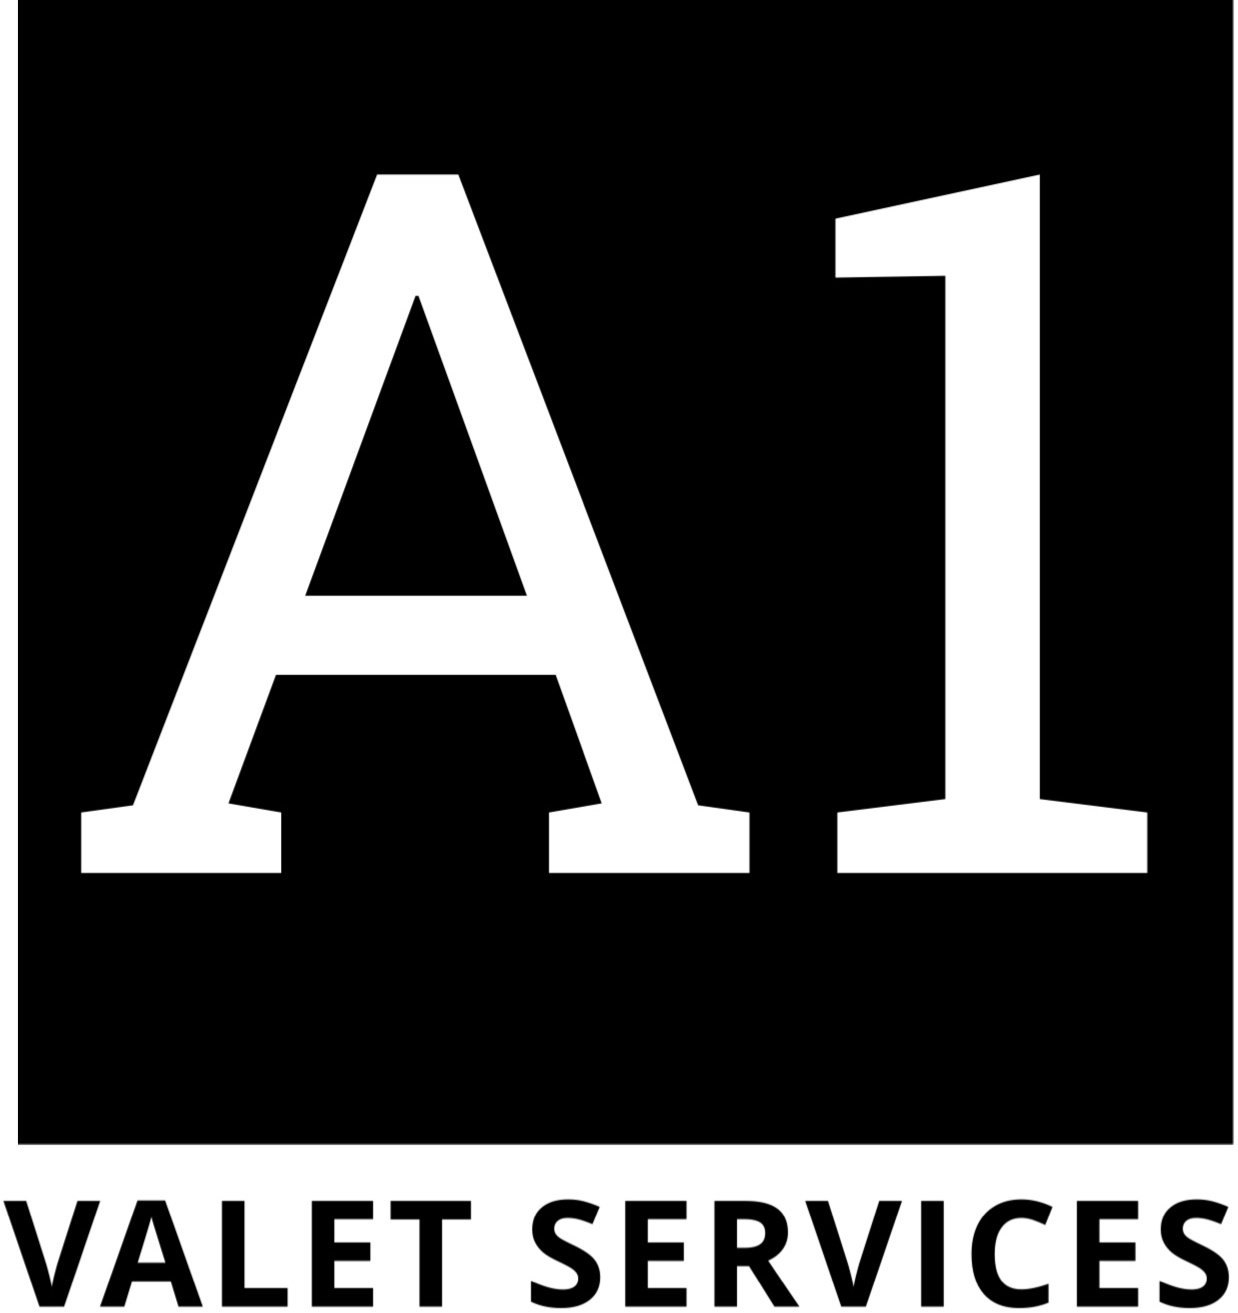 A1 VALET SERVICES